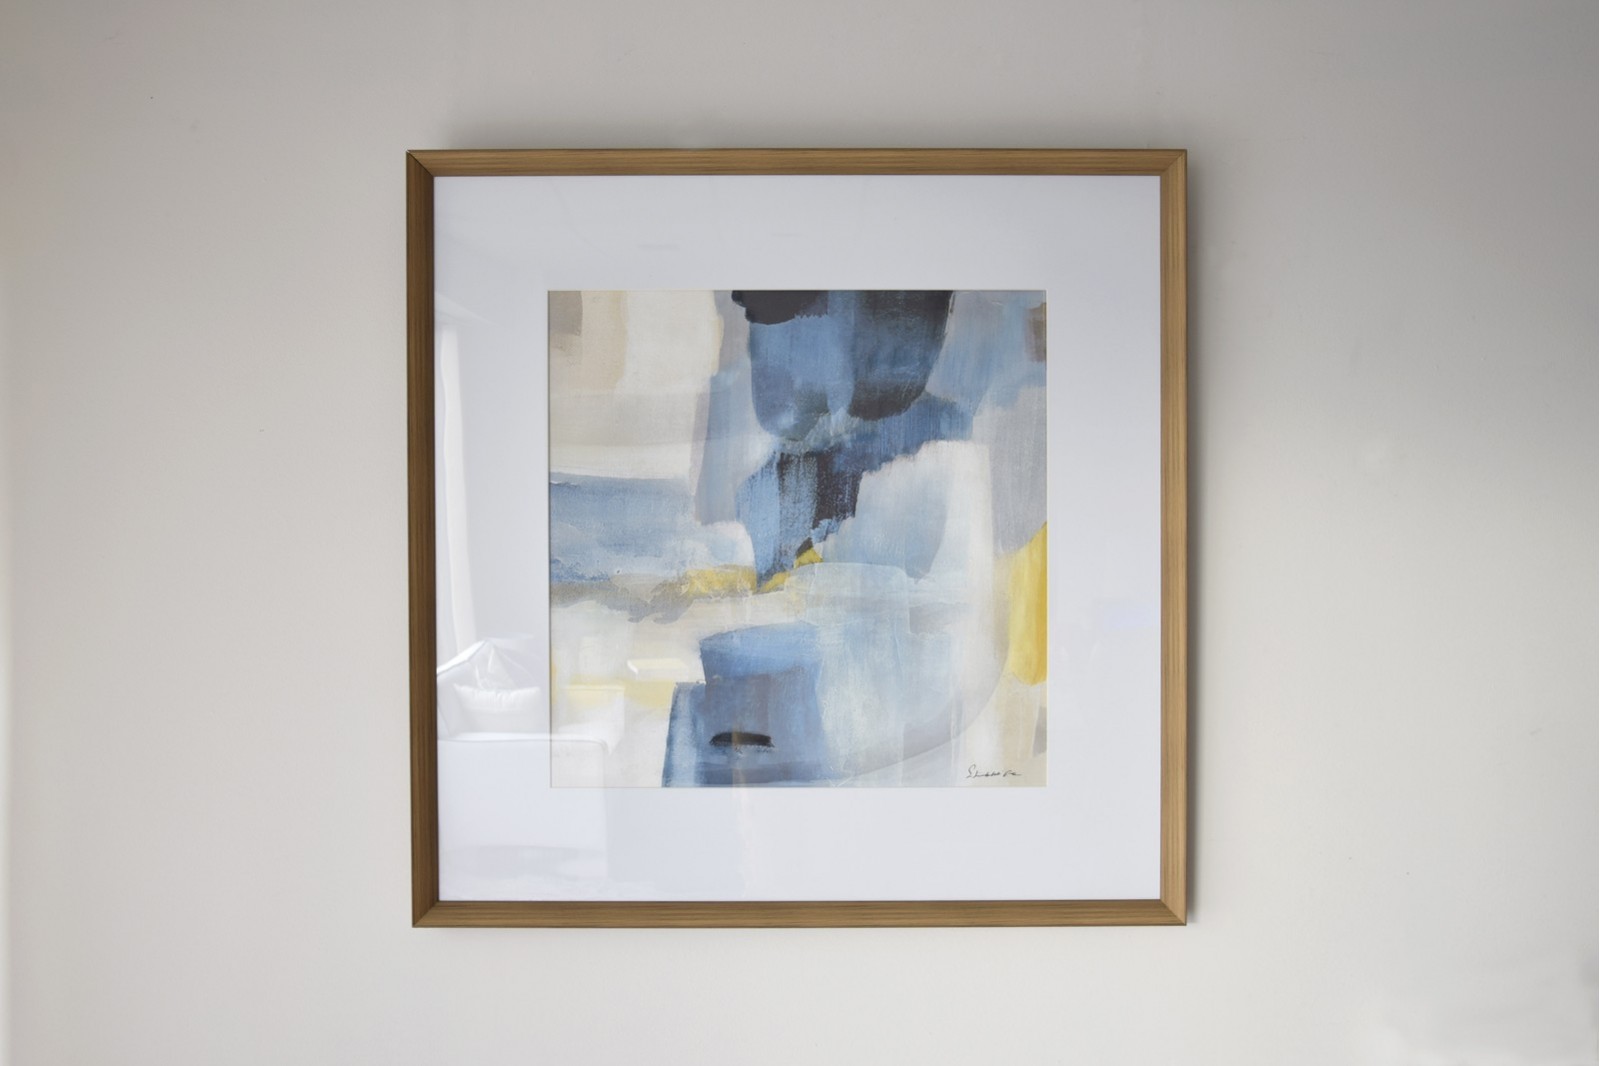 ABSTRACT PAINTING IN BLUE N1. GLASS AND FRAME